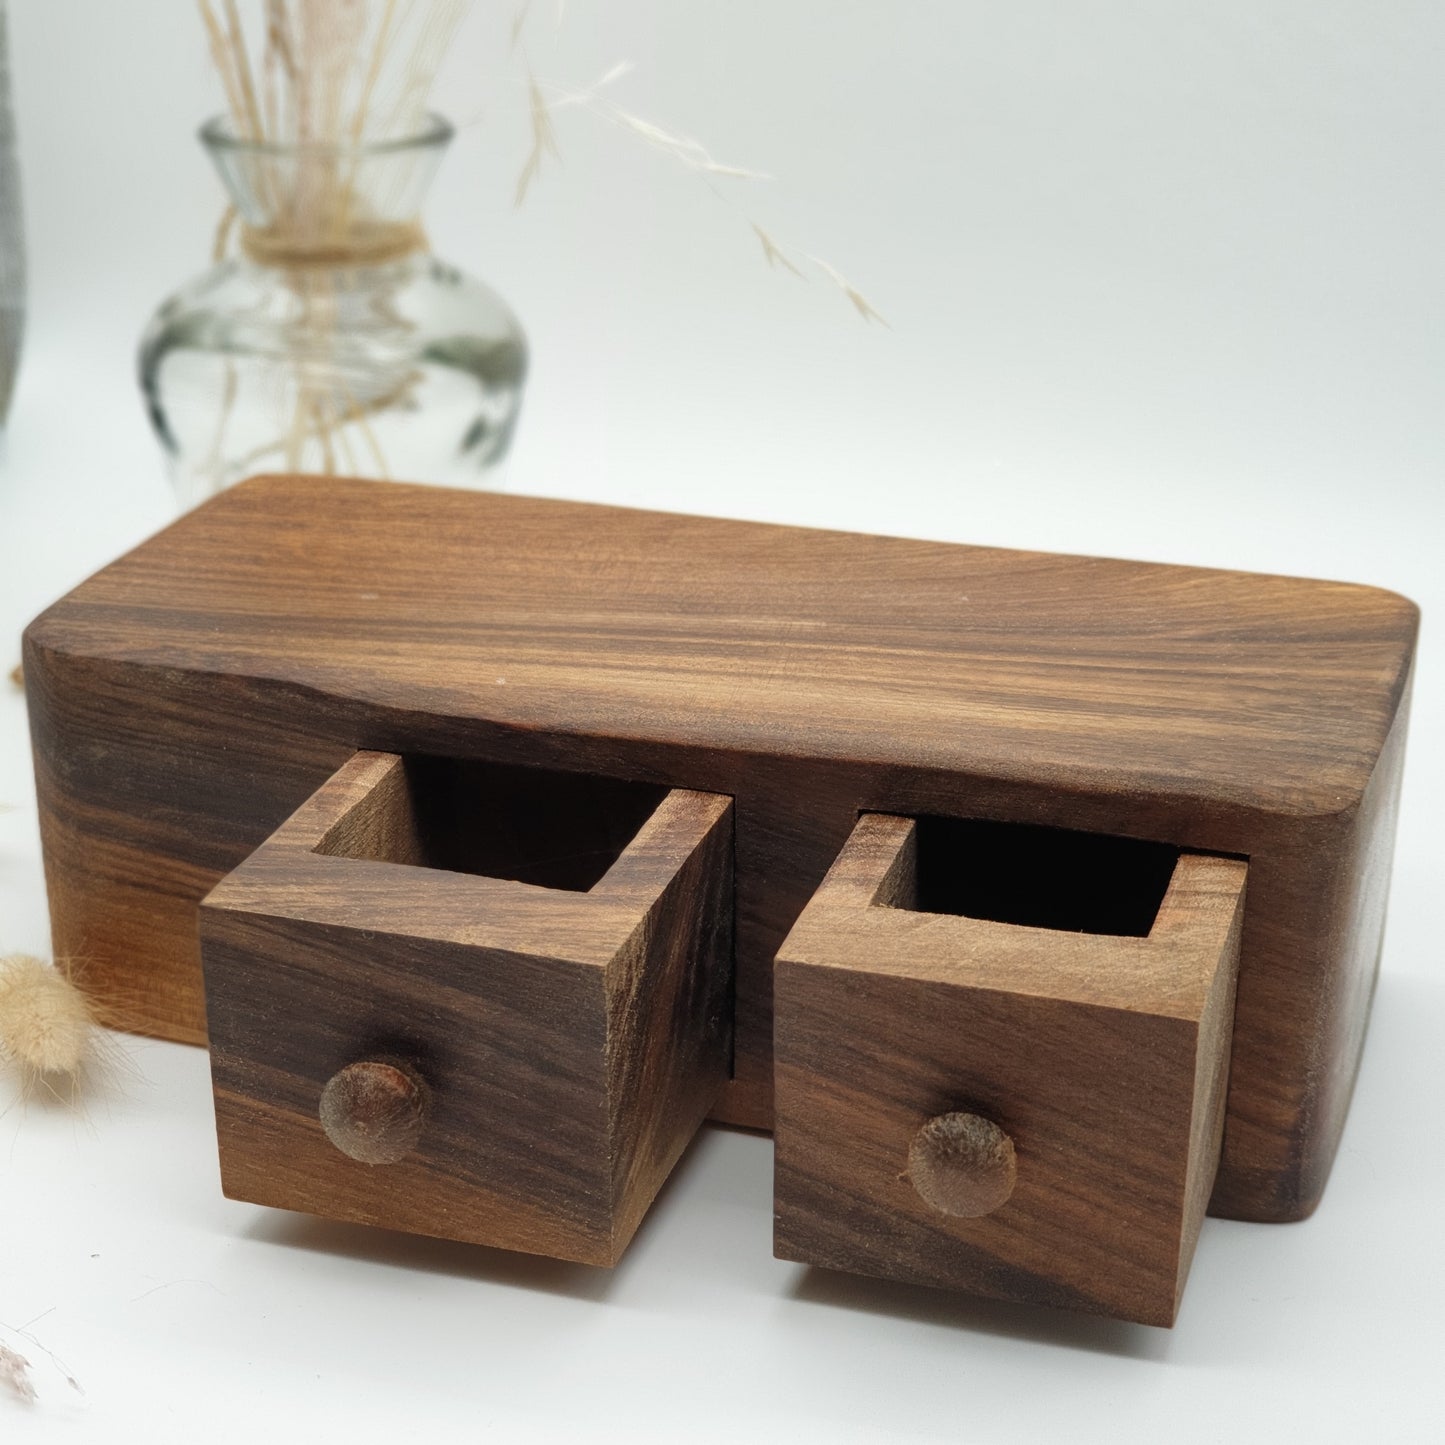 Natural edge wooden box double with secret drawer - Walnut